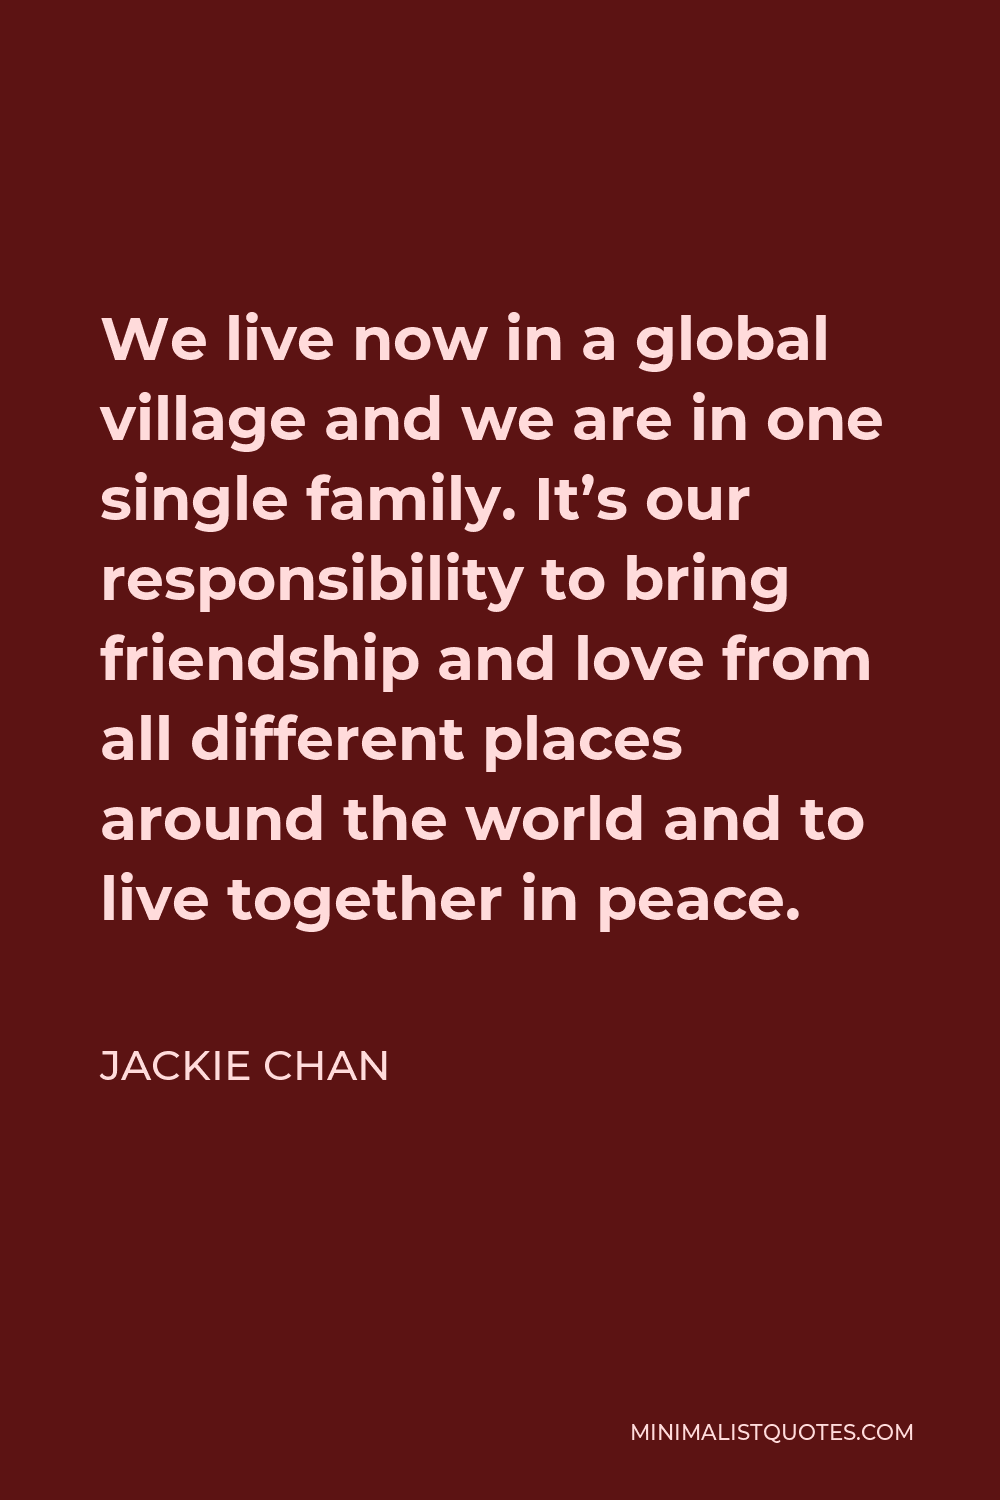 Jackie Chan Quote - We live now in a global village and we are in one single family. It’s our responsibility to bring friendship and love from all different places around the world and to live together in peace.